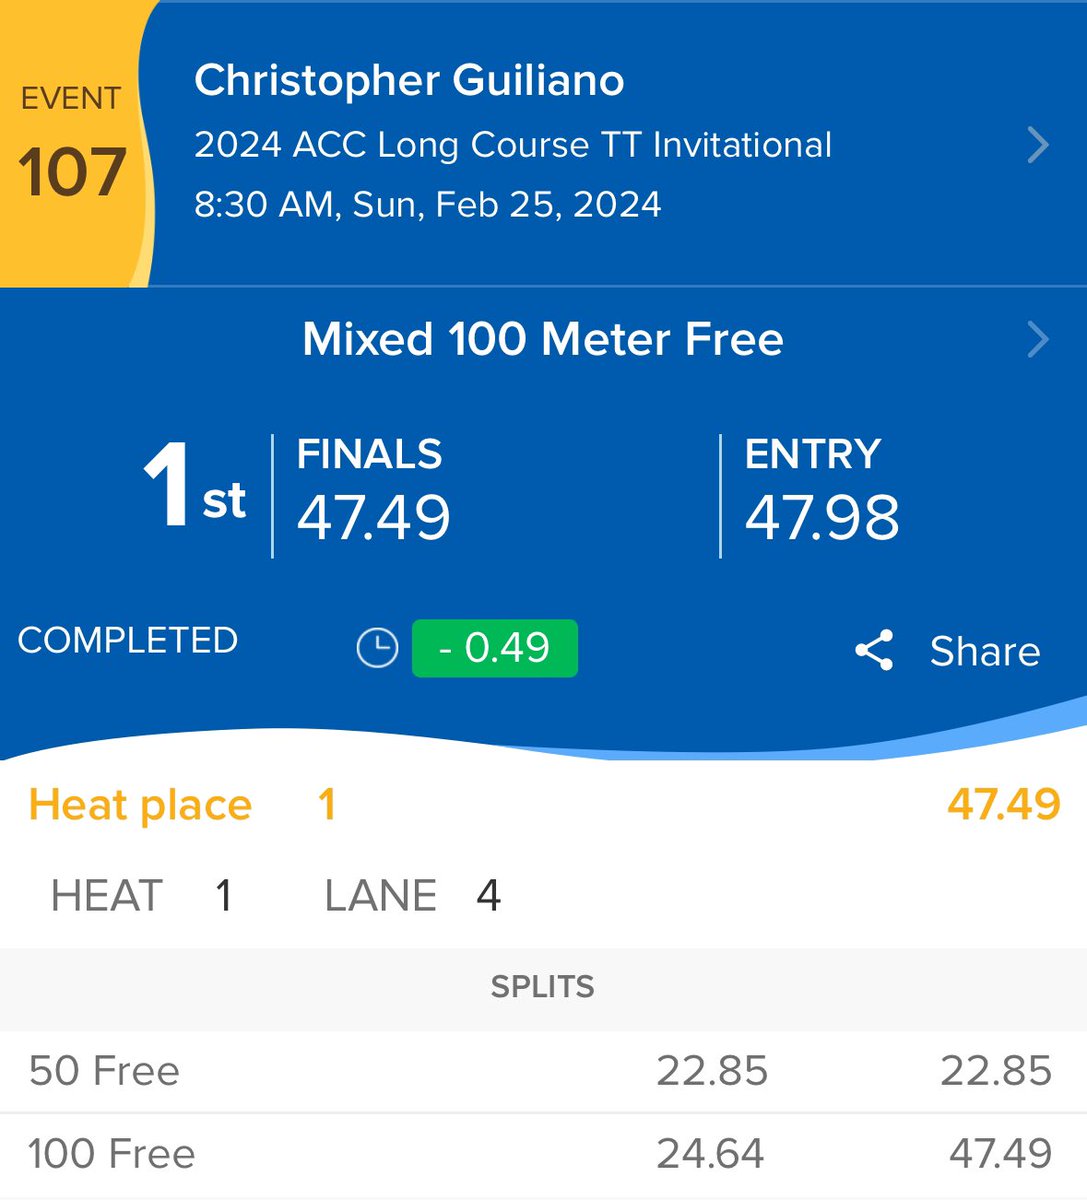 Heyyyy good morning swimming twitter! Chris Guiliano just went 47.49 in a 100 free time trial after ACCs. That’s all 🤝